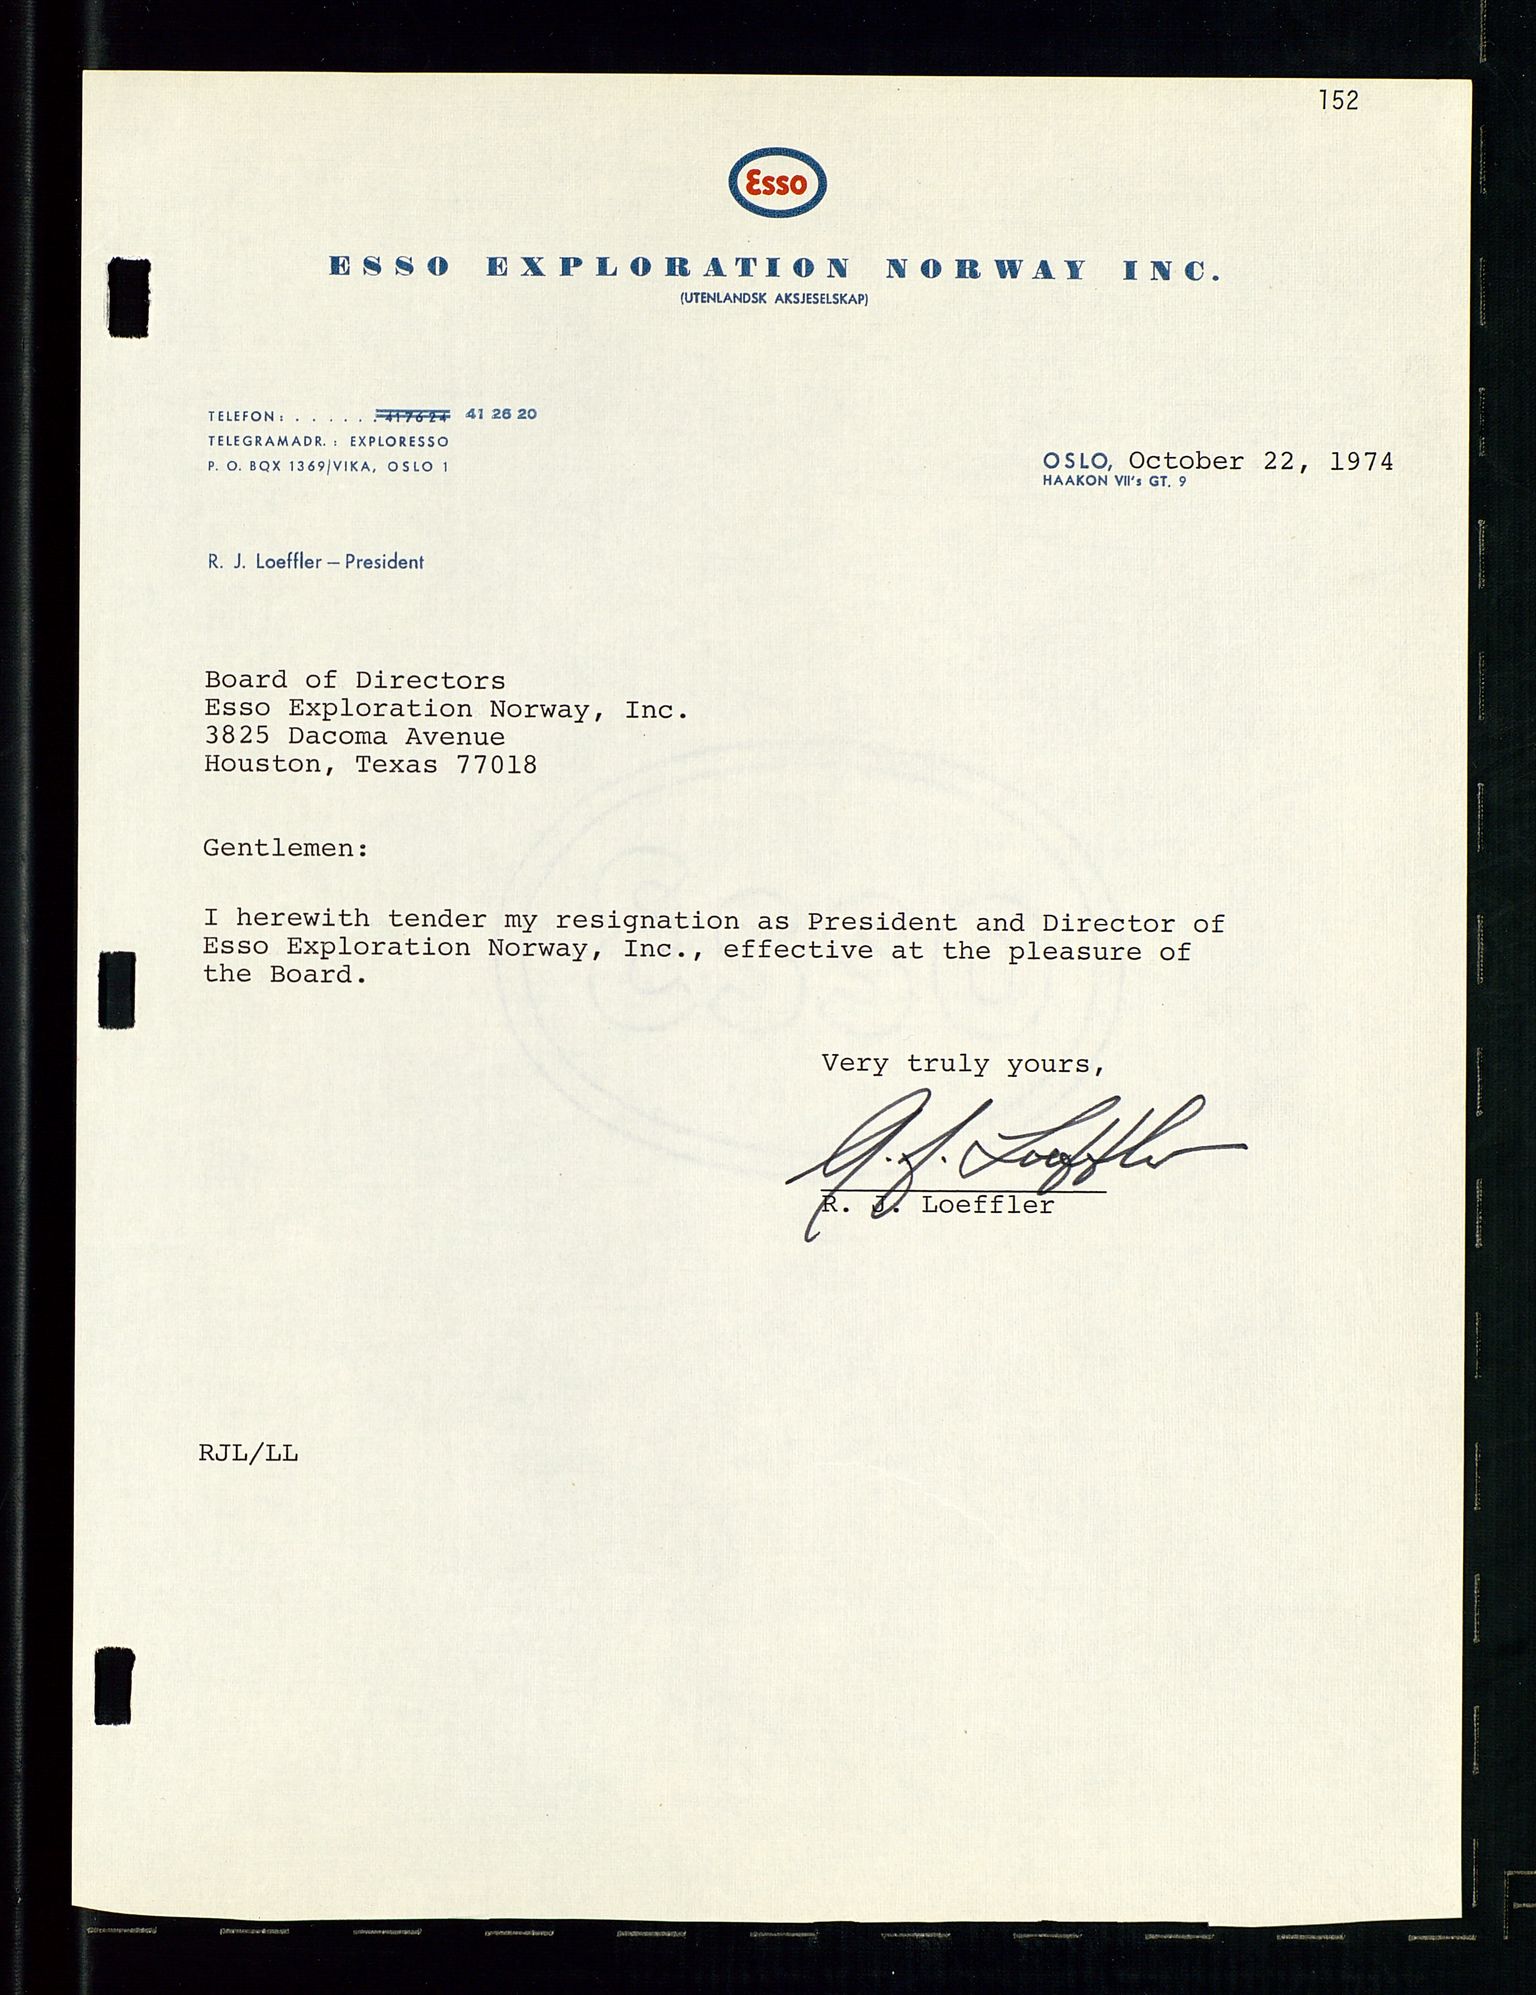 Pa 1512 - Esso Exploration and Production Norway Inc., SAST/A-101917/A/Aa/L0001/0001: Styredokumenter / Corporate records, By-Laws, Board meeting minutes, Incorporations, 1965-1975, s. 152